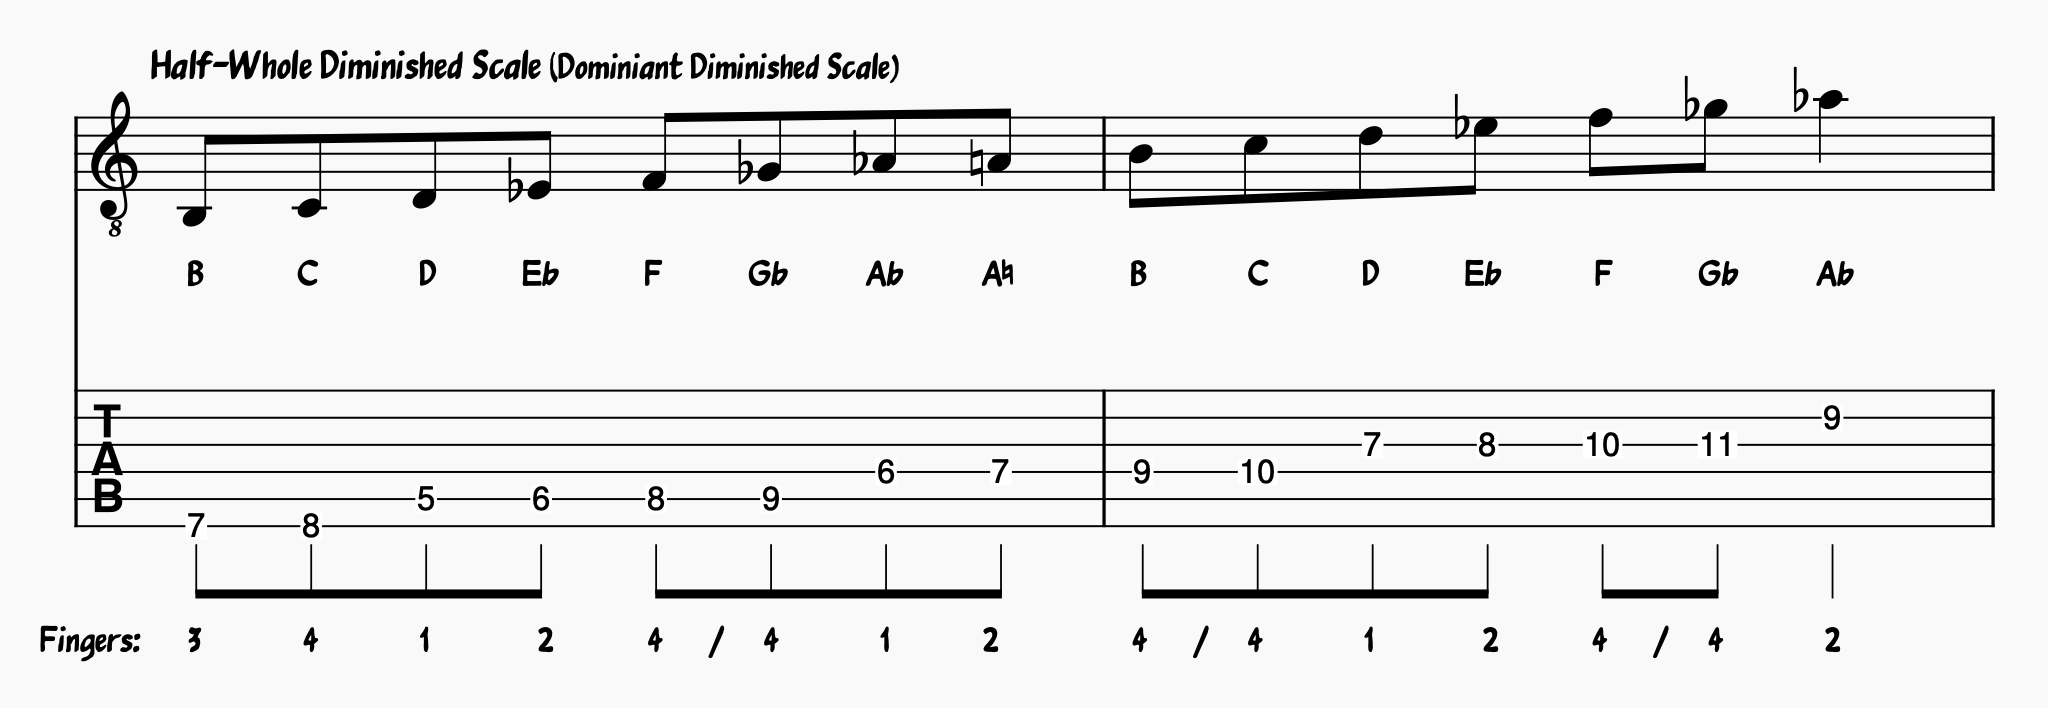 Half-Whole Diminished Scale on Guitar